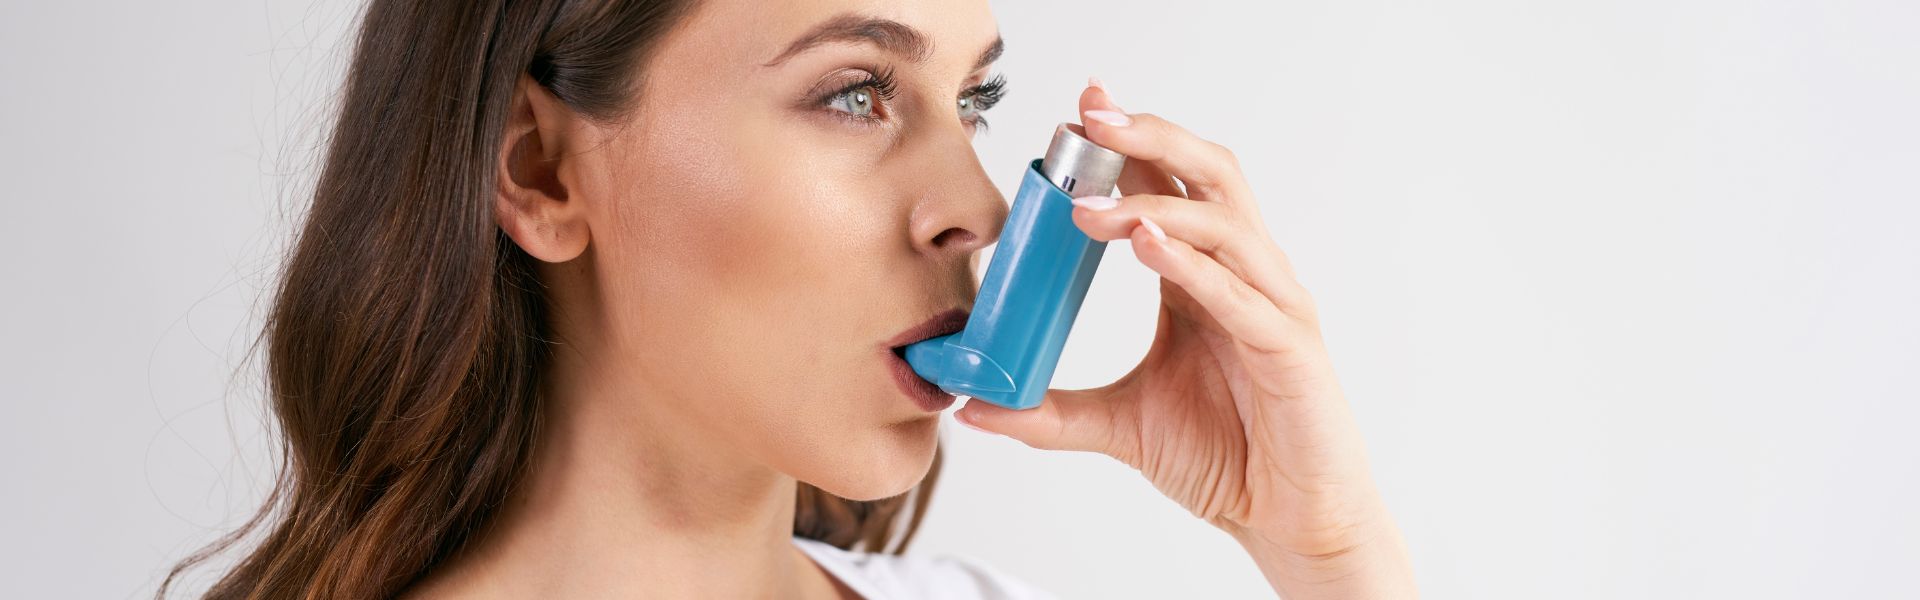 Asthma Treatment in Homeopathy